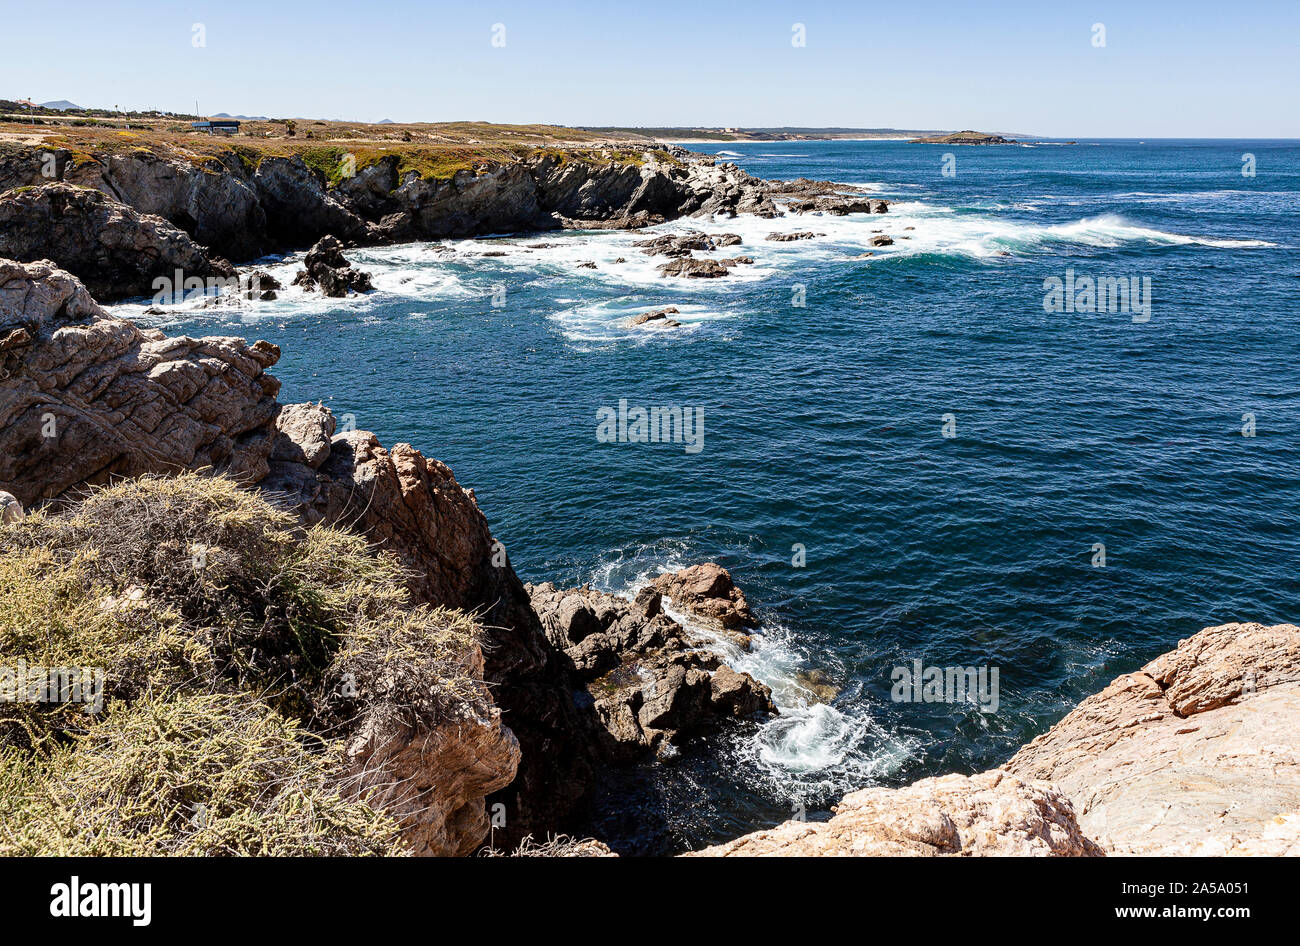 Route of the Fishermen, located in the southwest of Portugal, with its rock formations and crystalline sea. Stock Photo